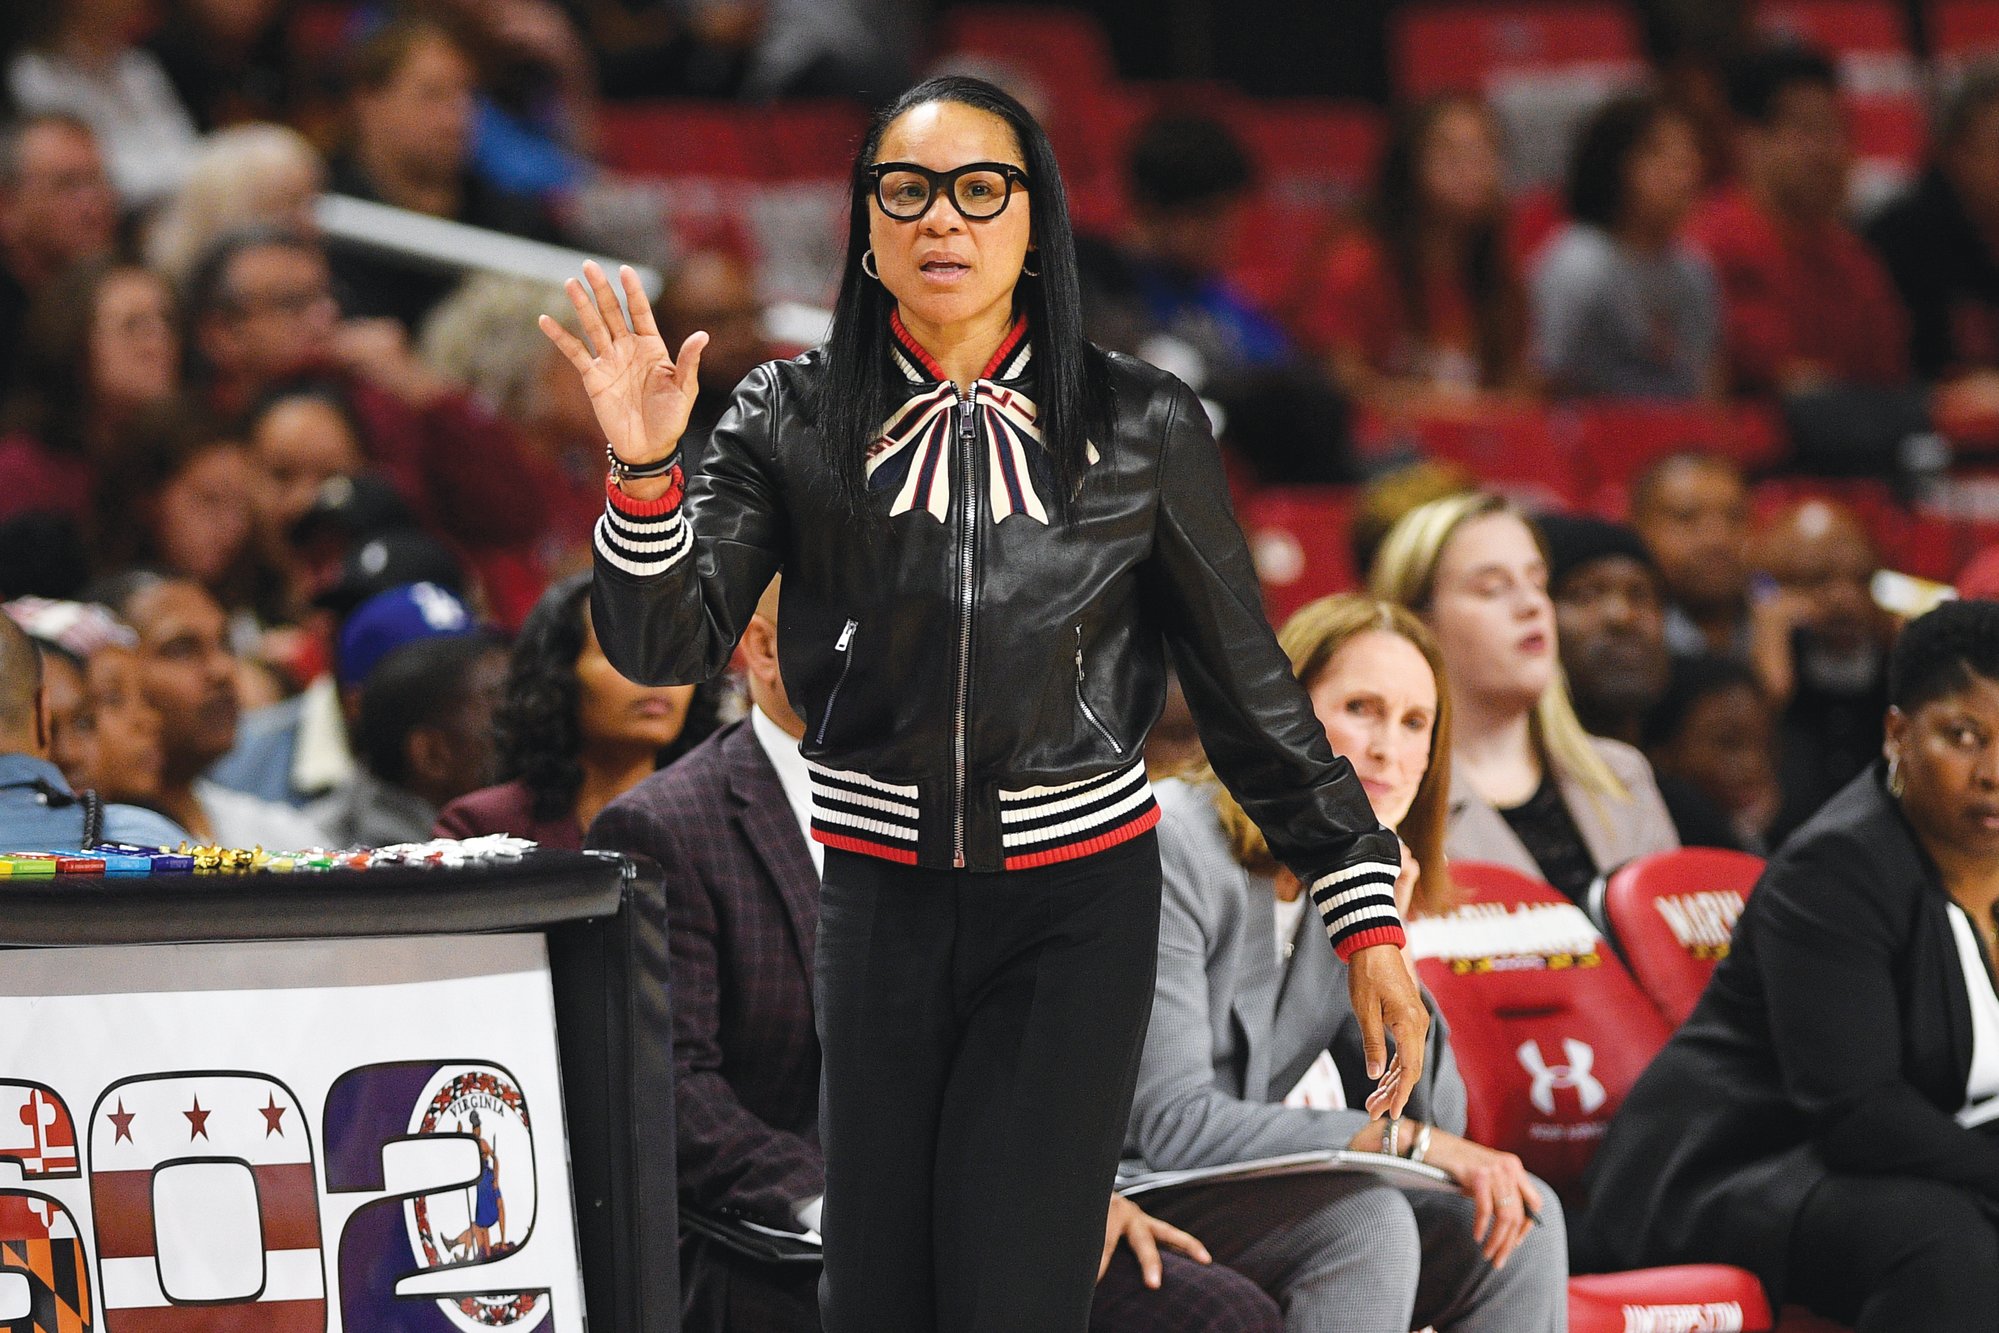 South Carolina head coach Dawn Staley gestures during the first half of an NCAA college basketball game against Maryland, Sunday, Nov. 10, 2019, in College Park, Md.